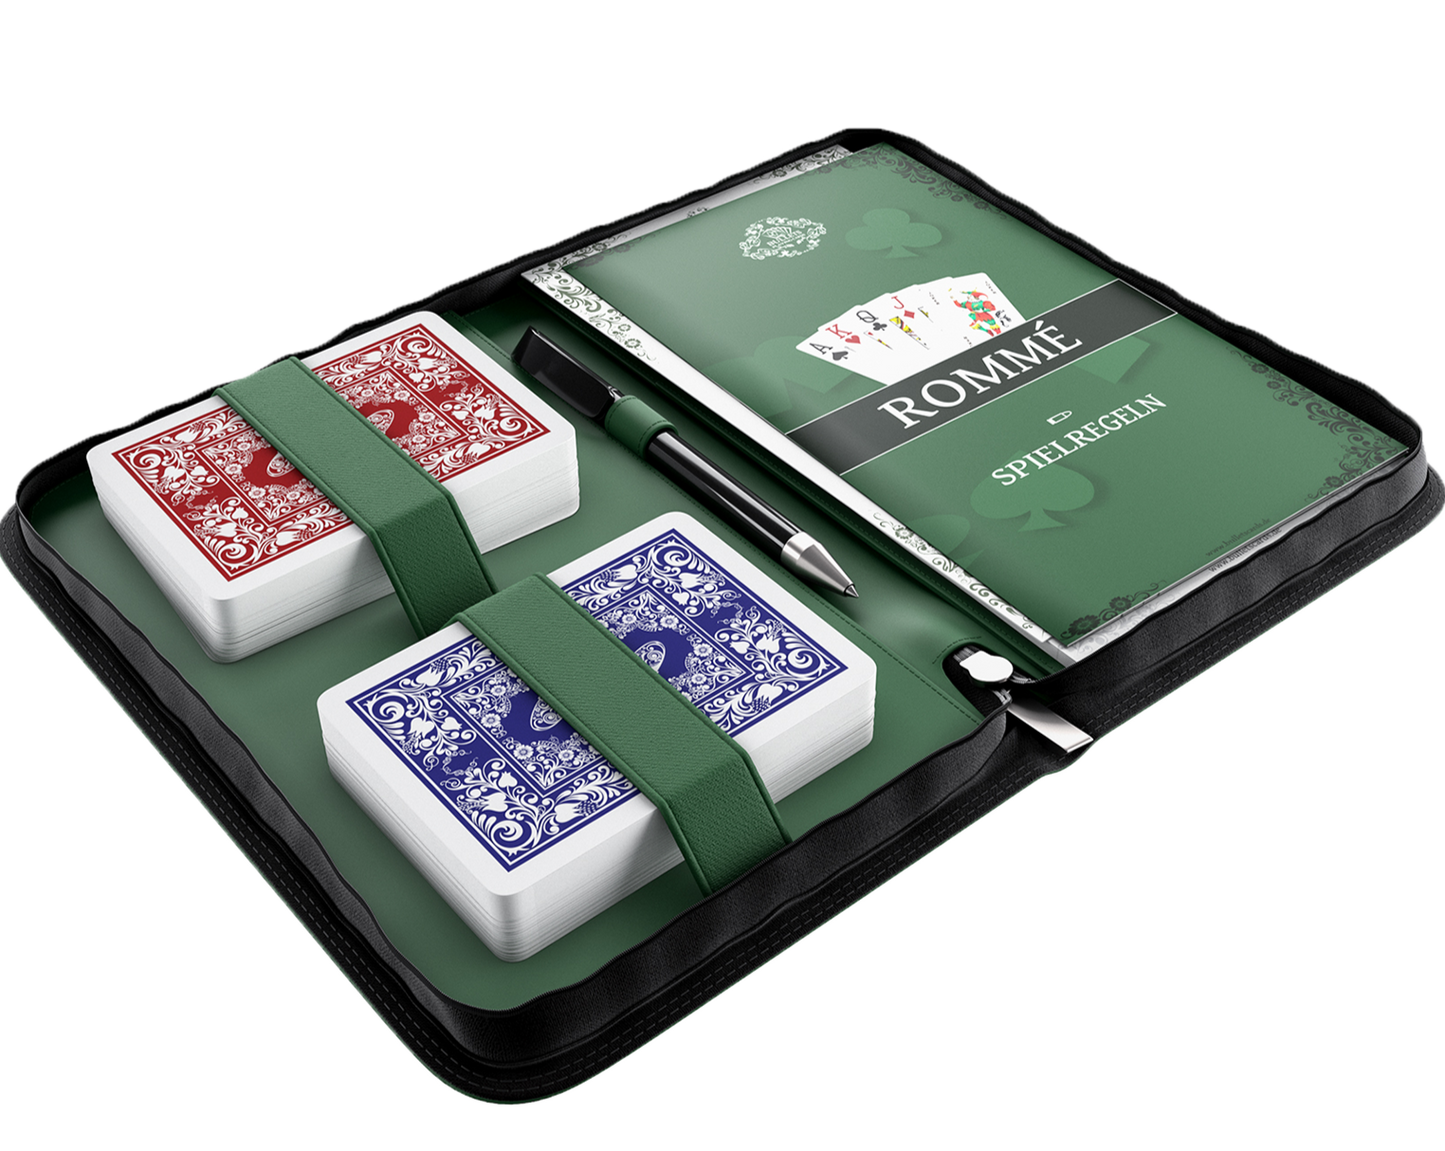 Rummy set in artificial leather case, including plastic playing cards, rules of the game with 15 Rummy variants, short rules, pen and pad